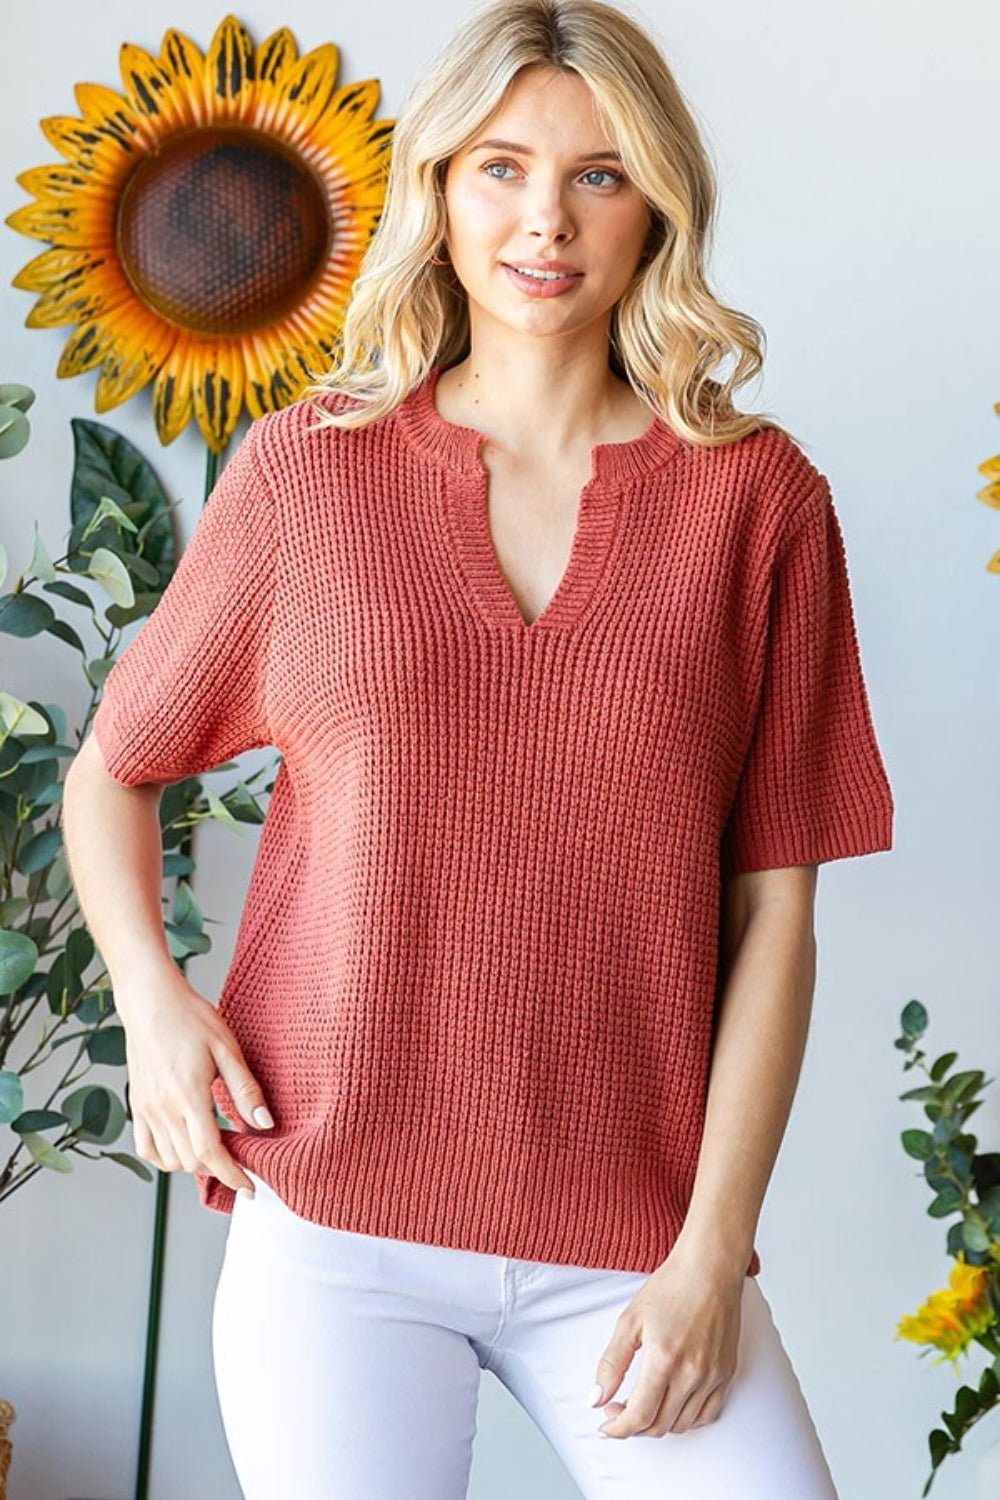 Notched Short Sleeve Knit Top